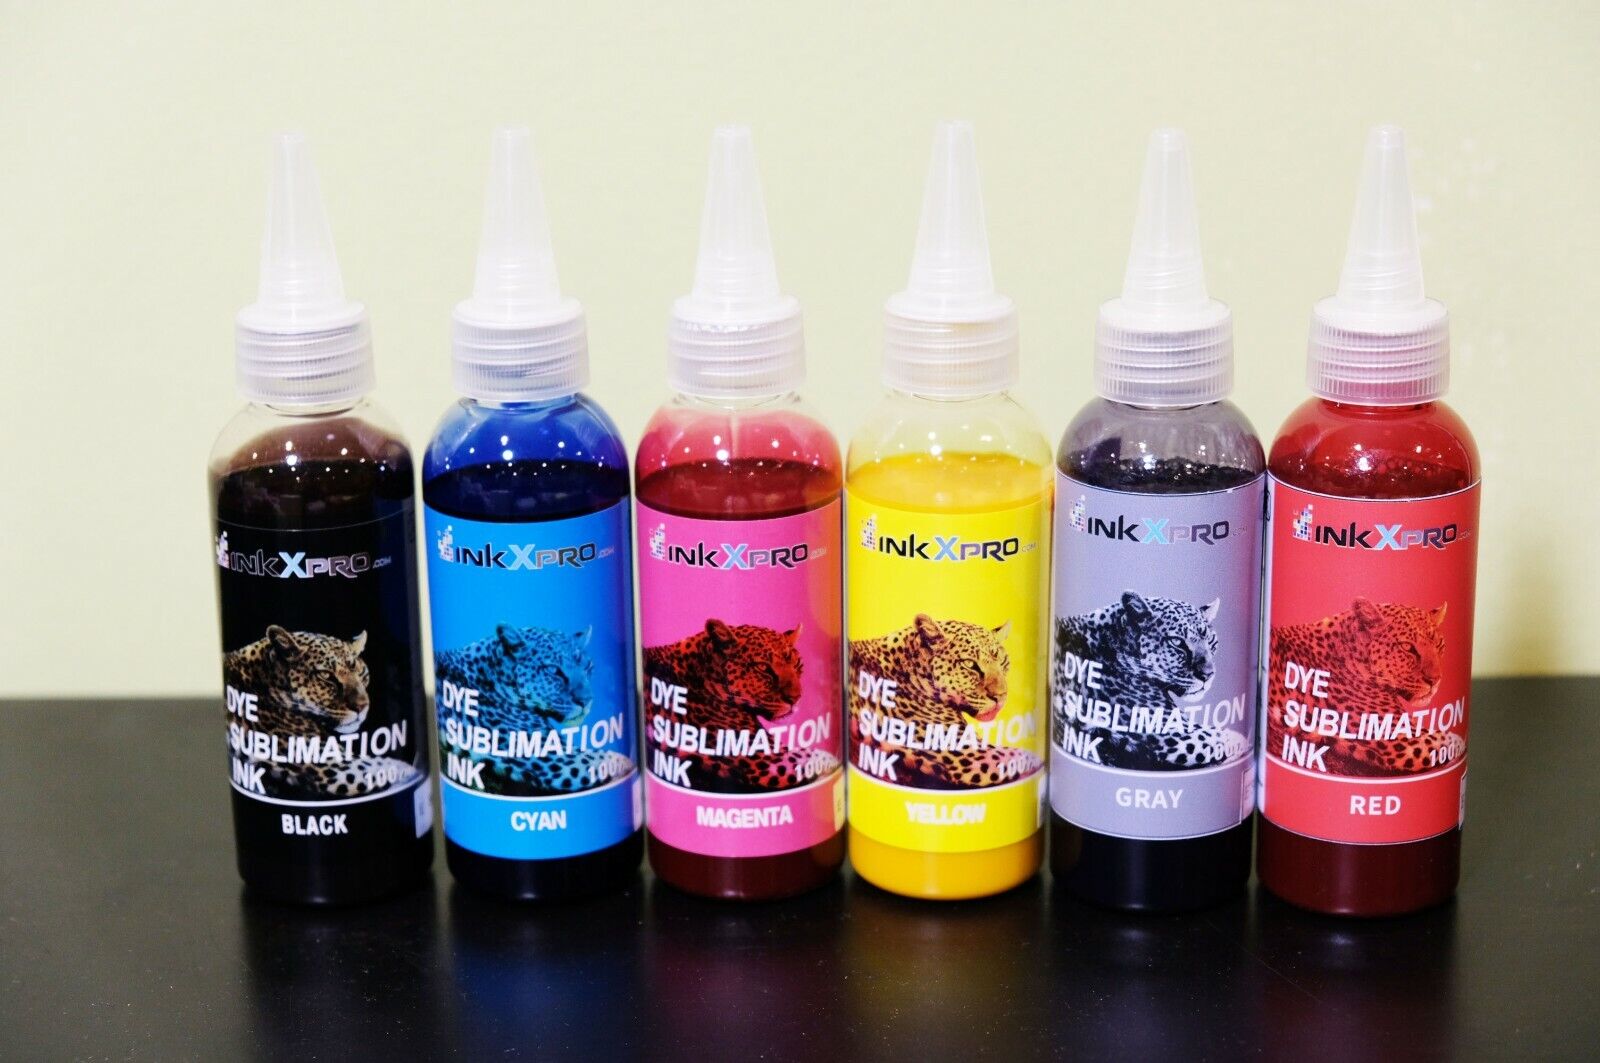 XPRO 6X100ml Dye Sublimation Ink for Epson Expression Photo HD XP-15000